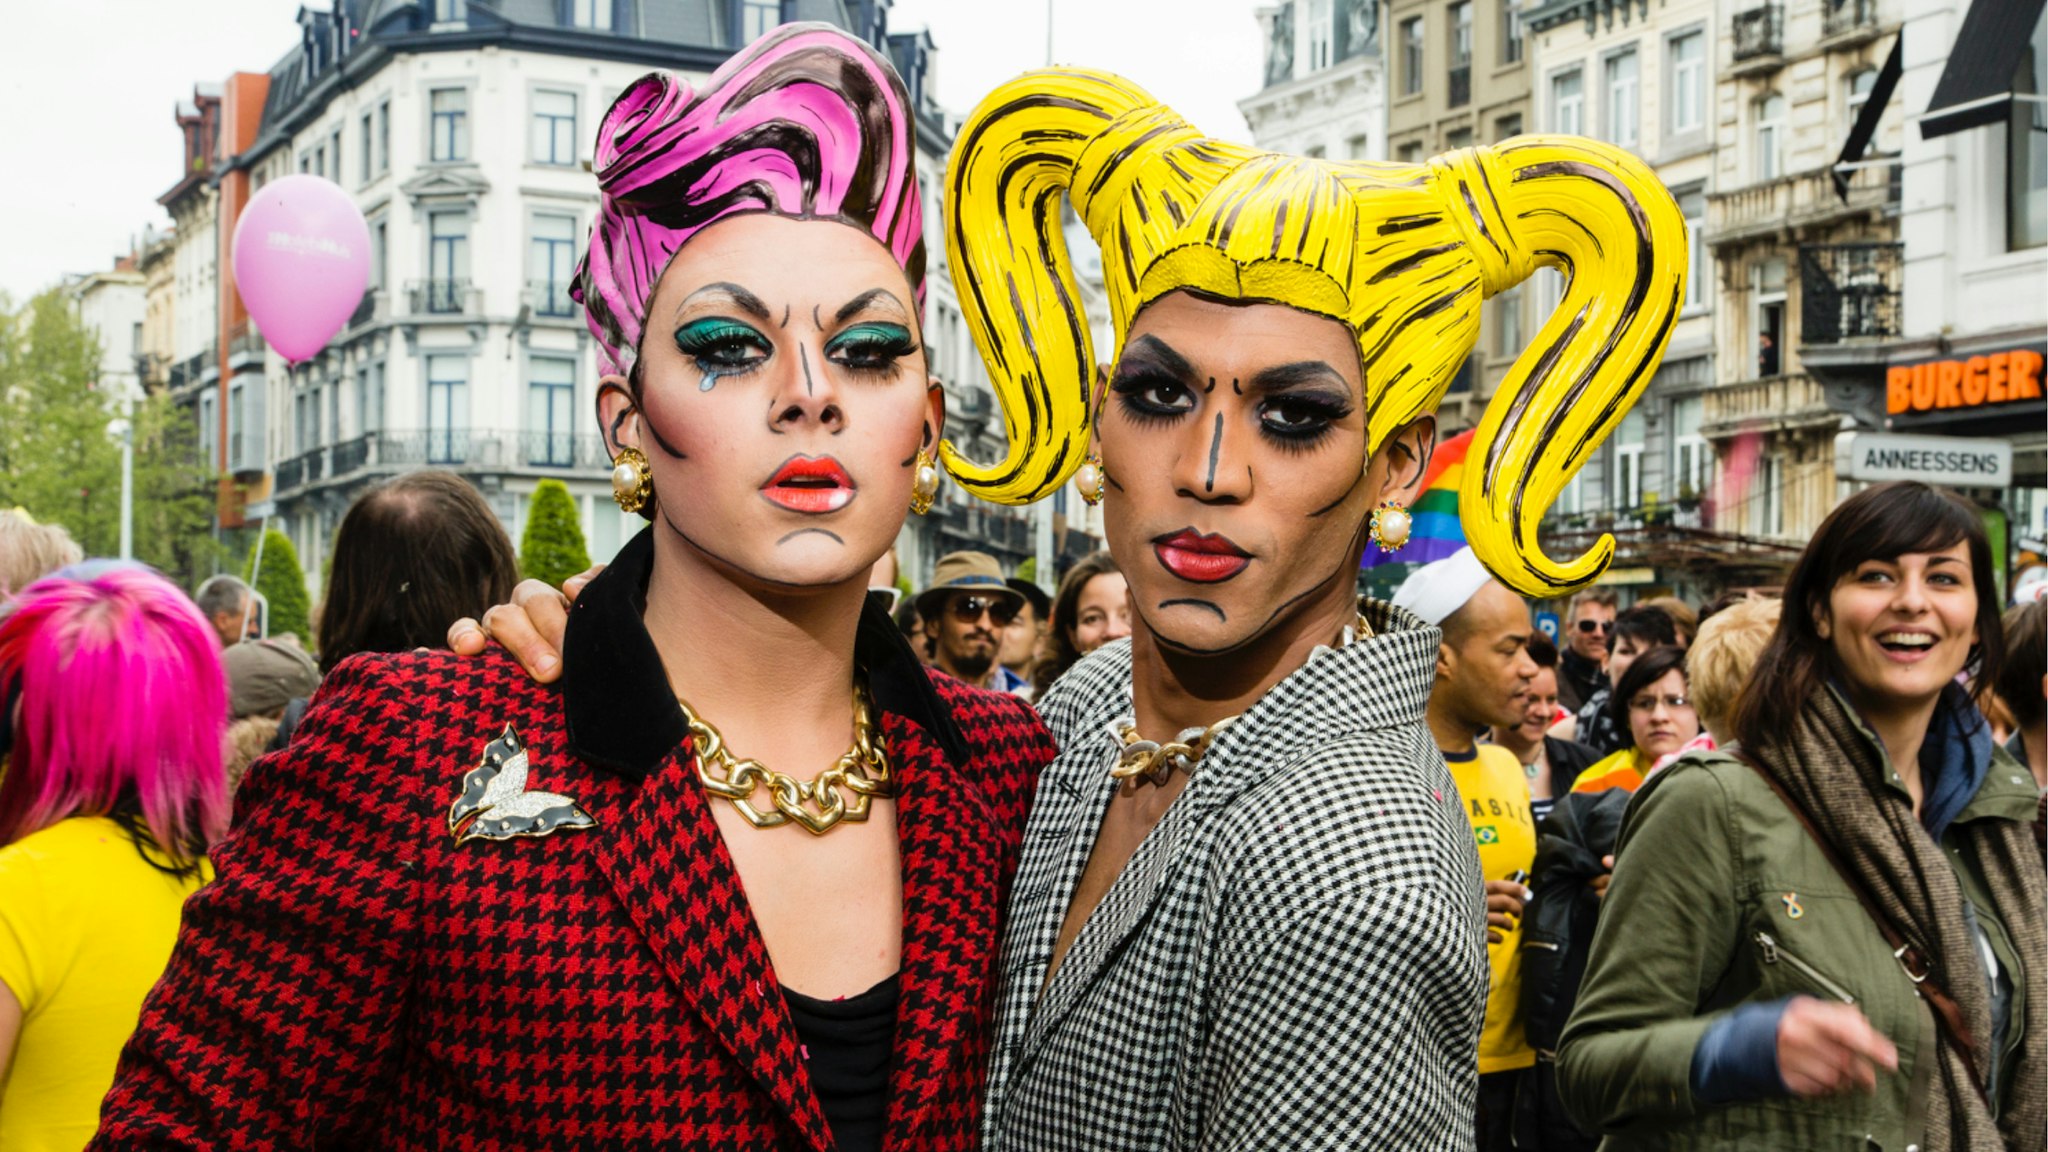 Two dressed up gay men pose in the streets of Brussels. About 80,000 participants at the Belgian Pride Parade to celebrate the LGBT (Lesbian, gay, bisexual, transgender) community and demand equal rights.